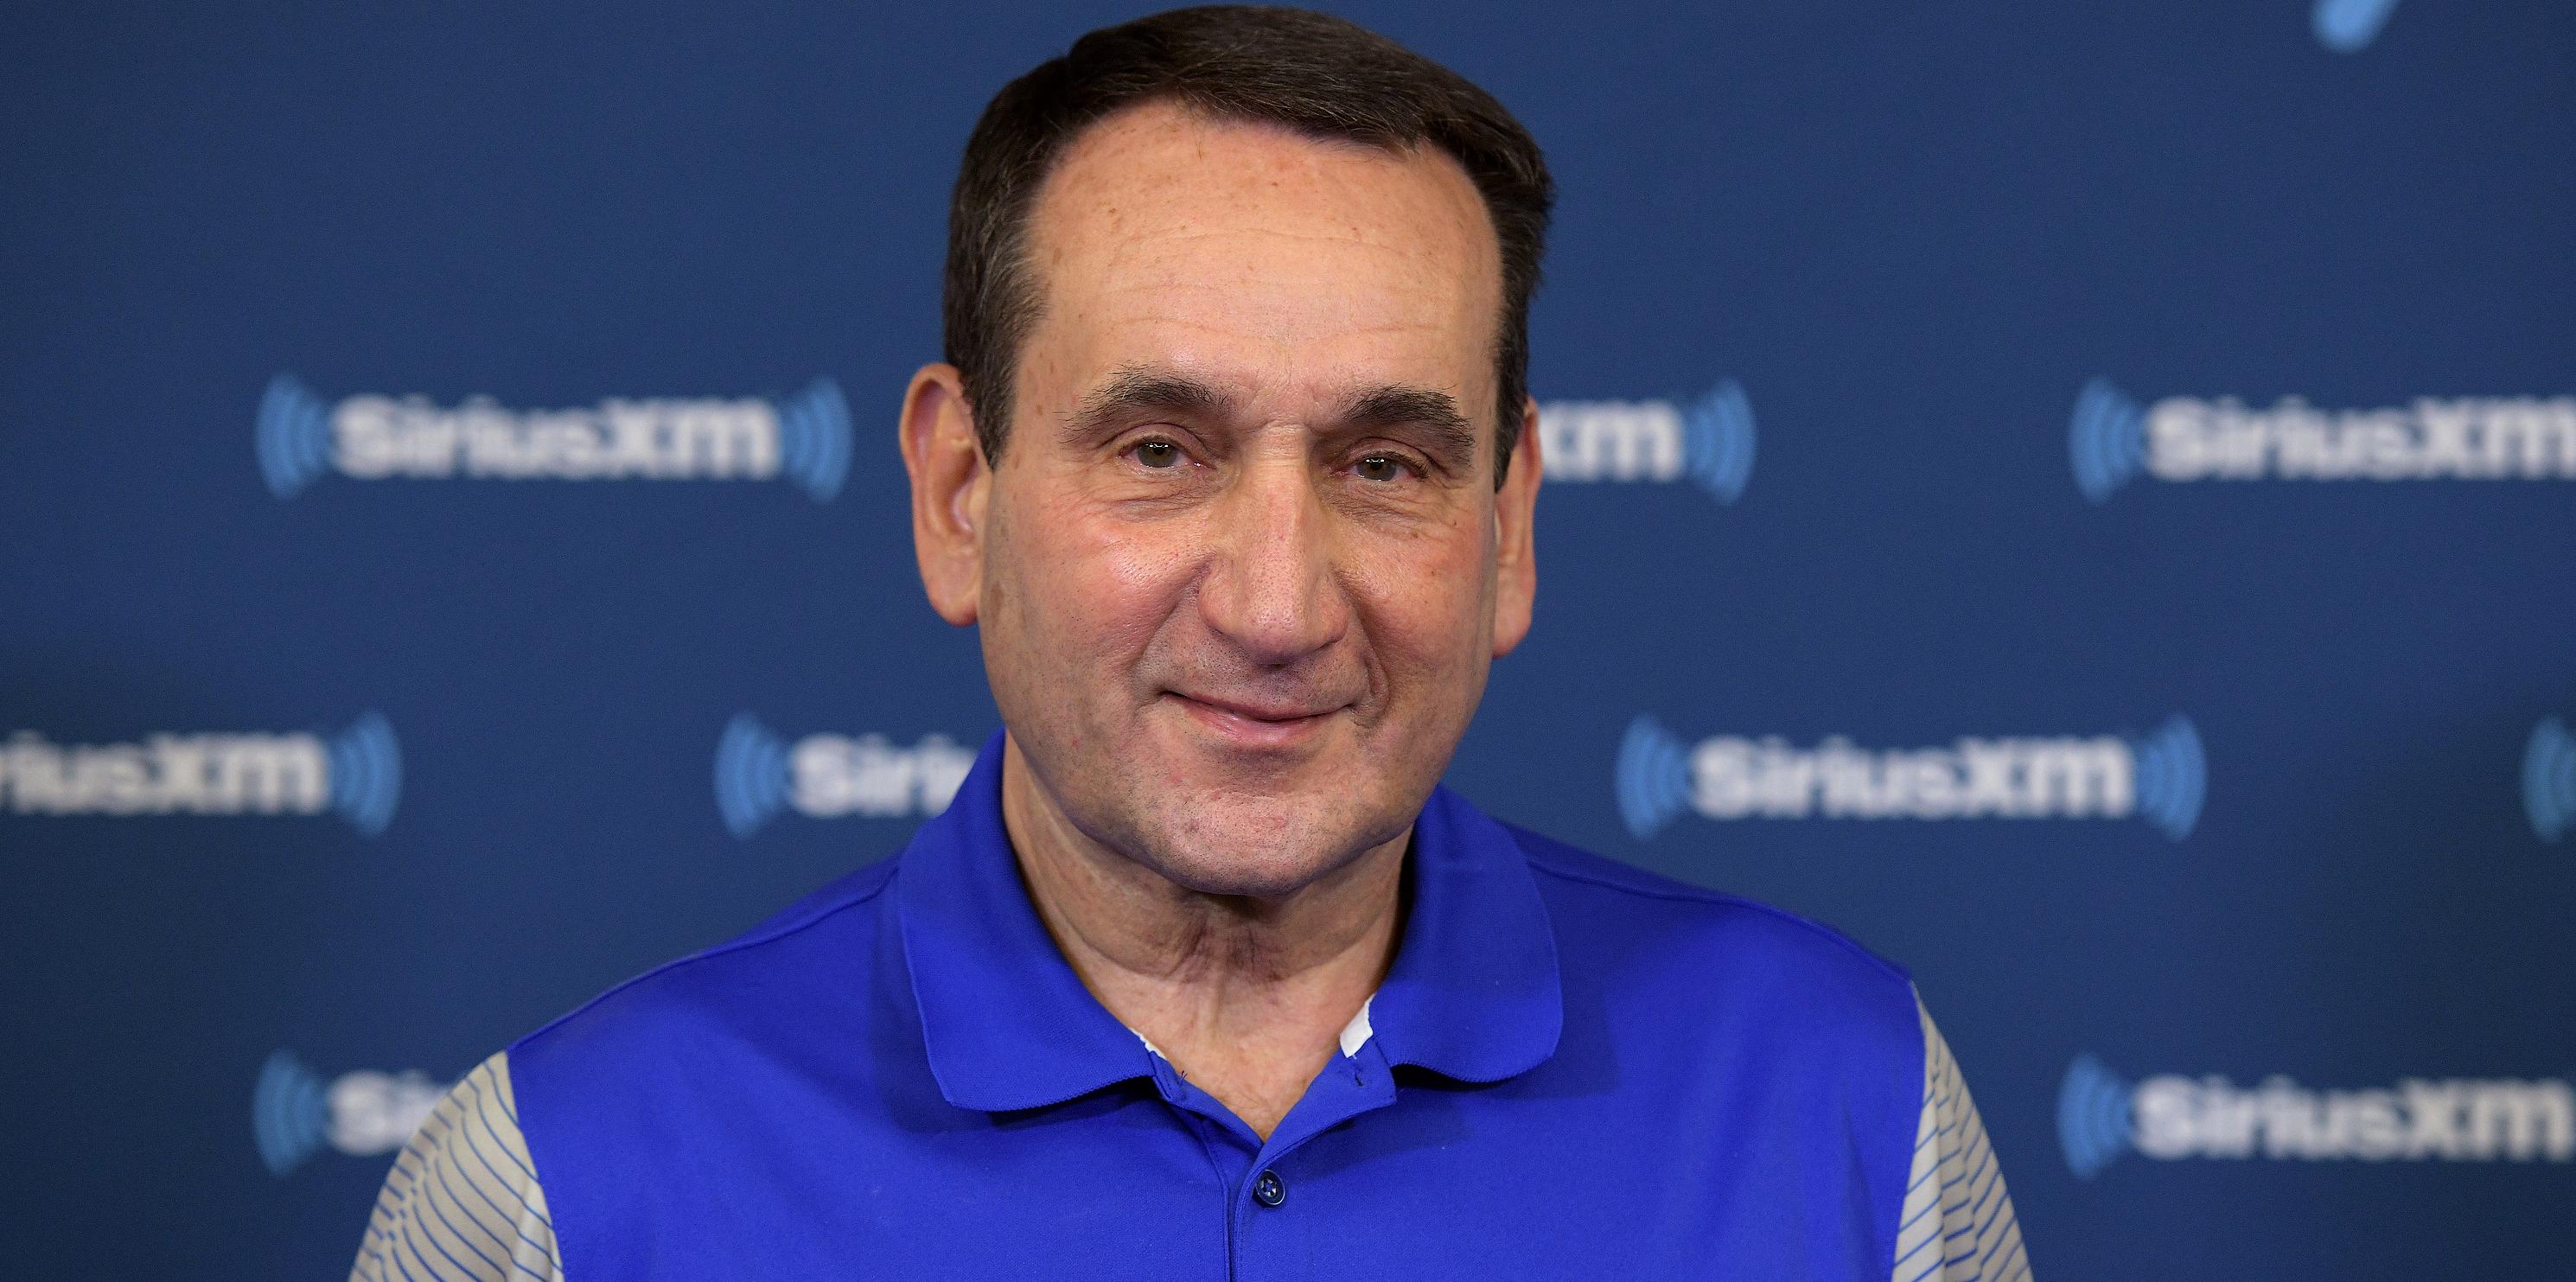 Here's every player coming back to Duke for Coach K's last home game